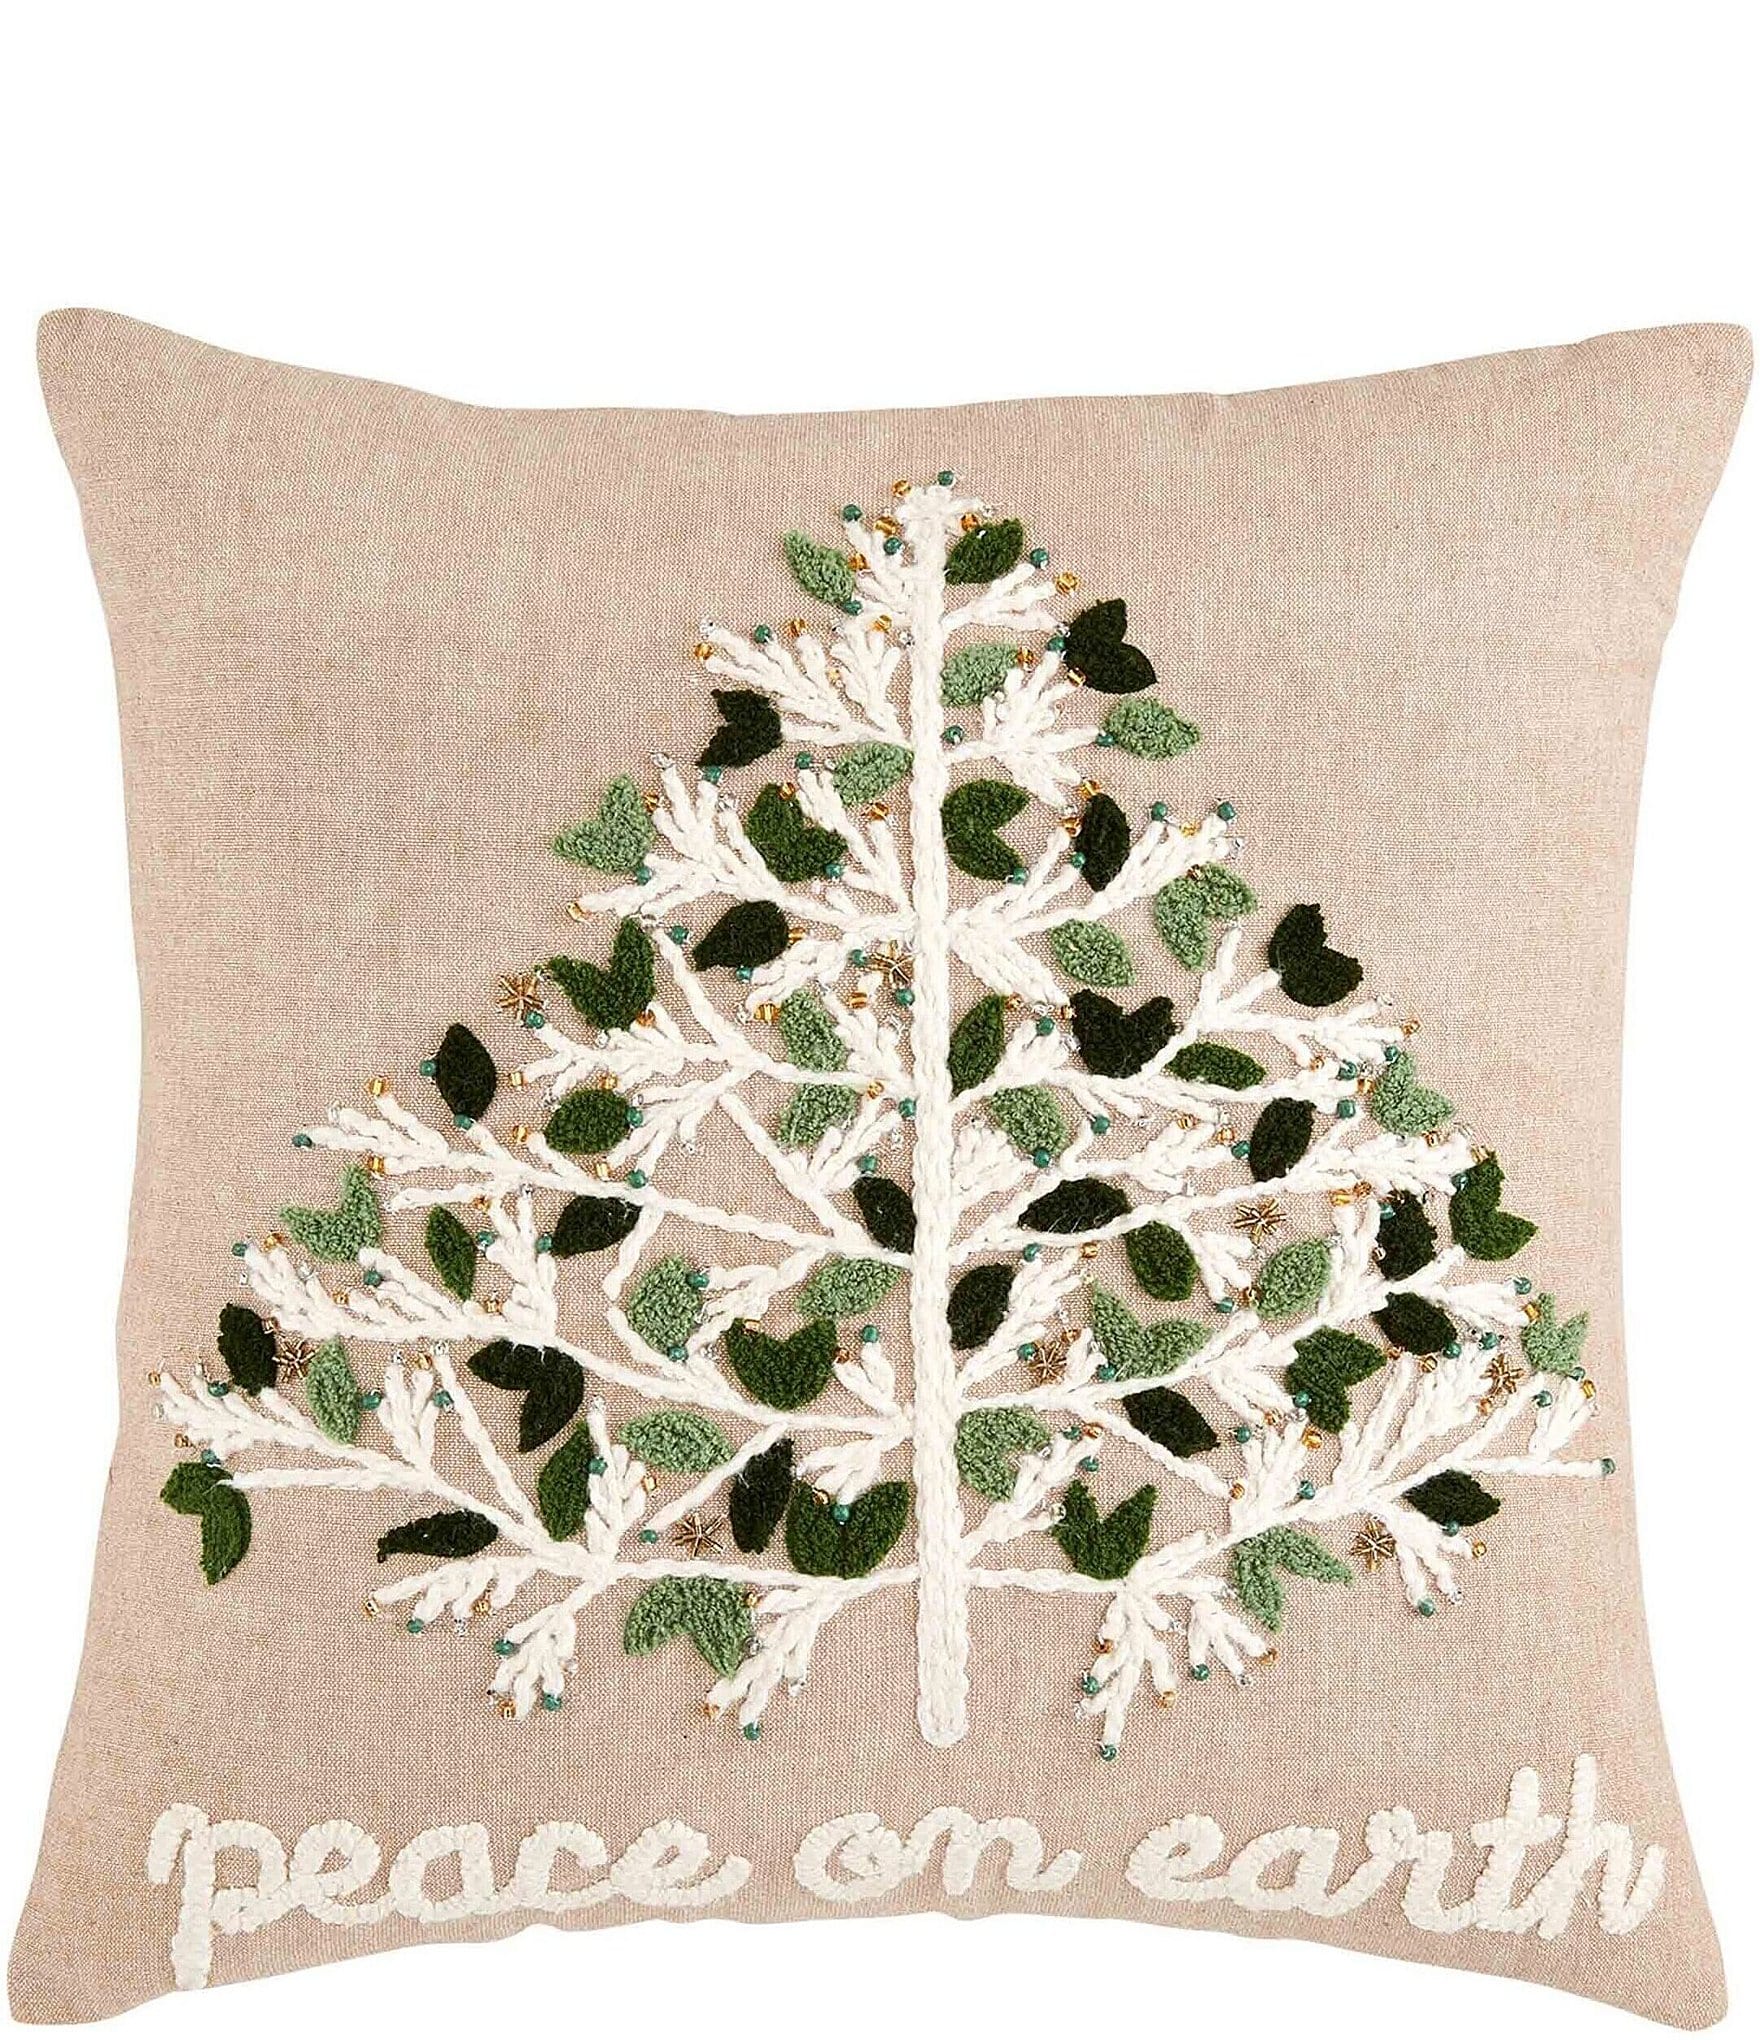 https://dimg.dillards.com/is/image/DillardsZoom/zoom/mud-pie-holiday-collection-embroidered-peace-on-earth-tree-pillow/00000000_zi_f390632c-d8f0-4872-9efb-8fc7903f3e23.jpg